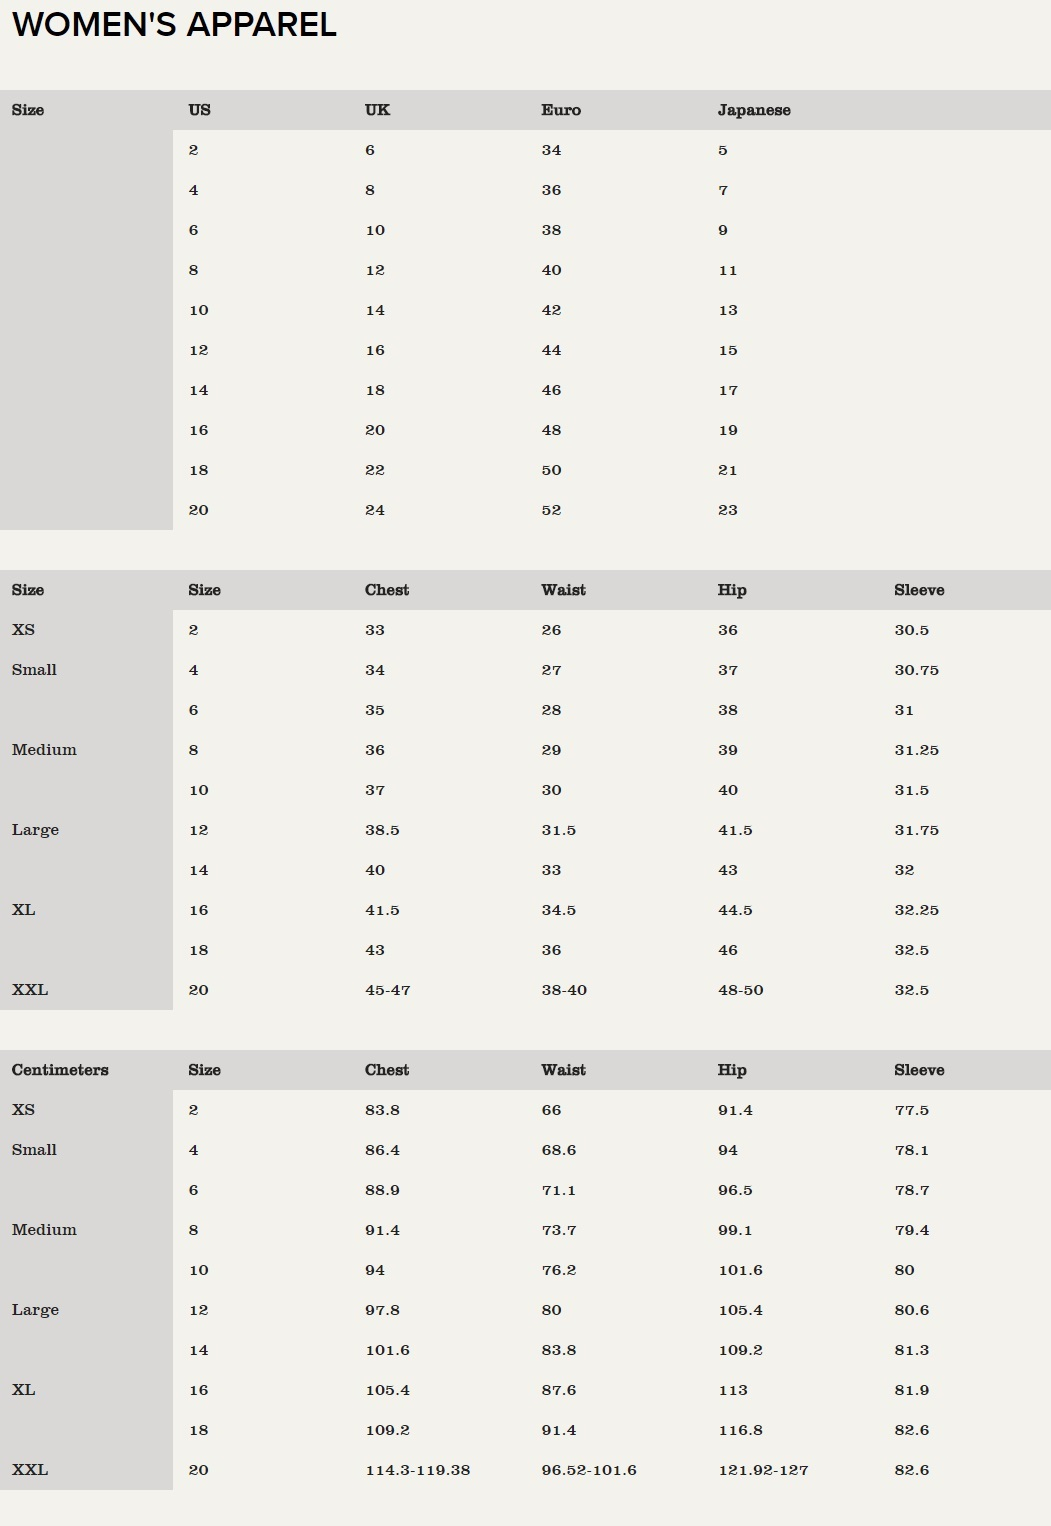 Ariat Clothing Size Chart